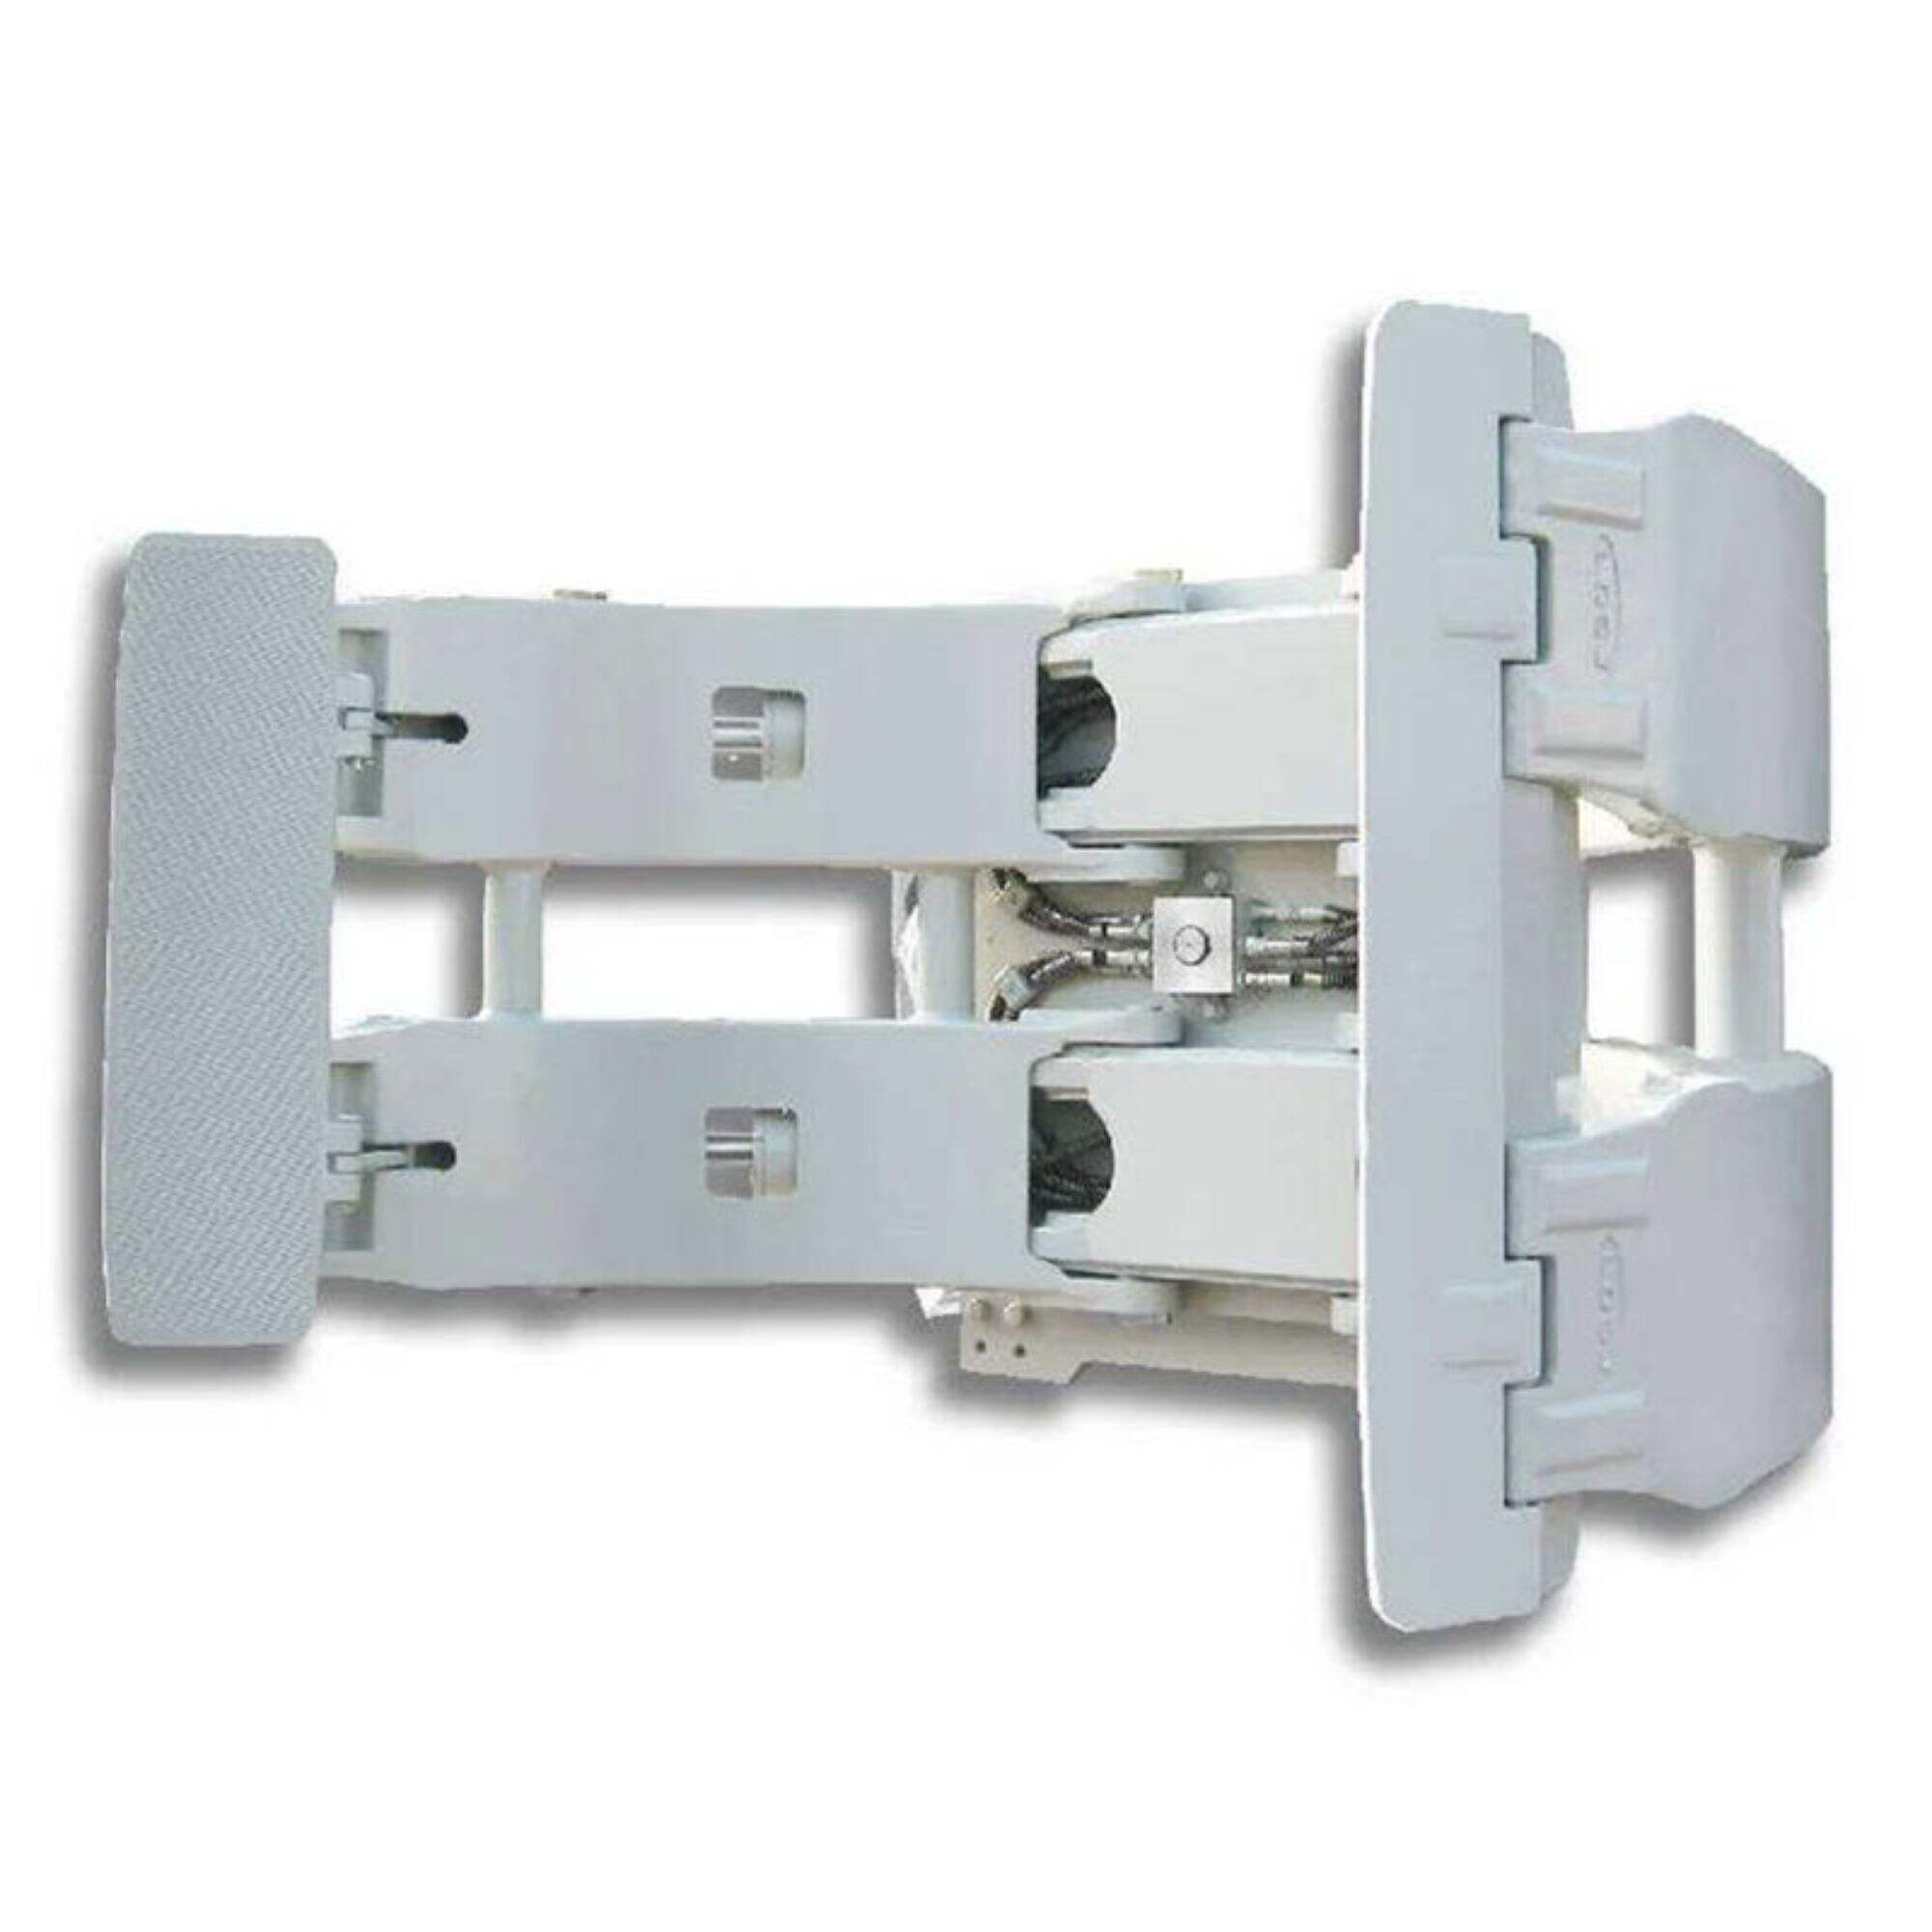 Forklift Parts Attachment Paper Roll Clamps With 360 Degree Rotation